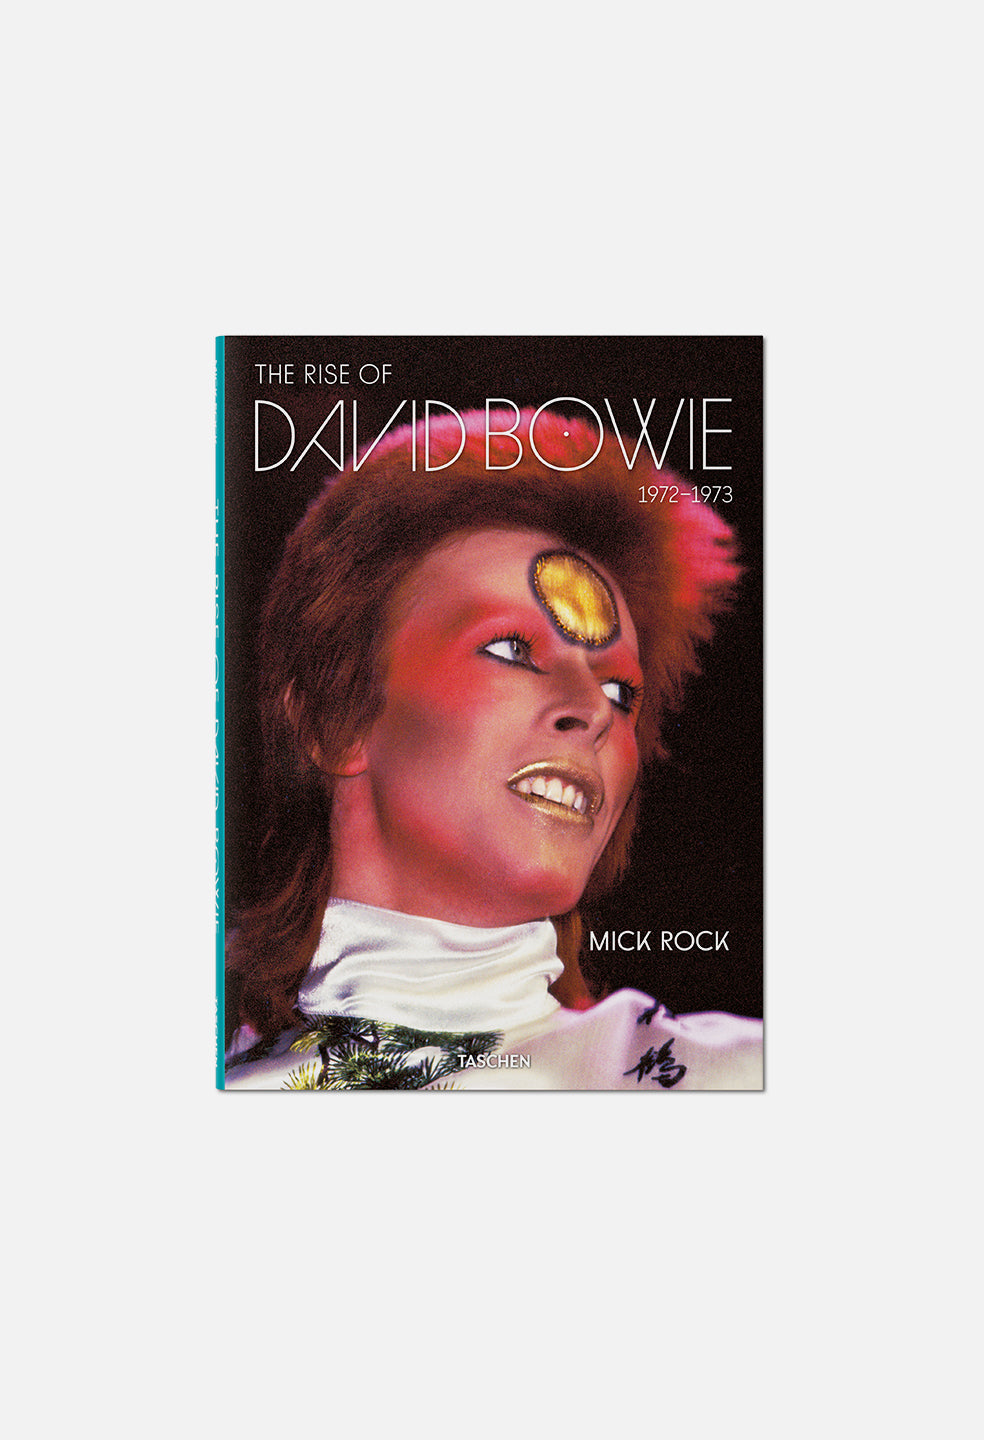 Taschen Books / Mick Rock. The Rise of David Bowie